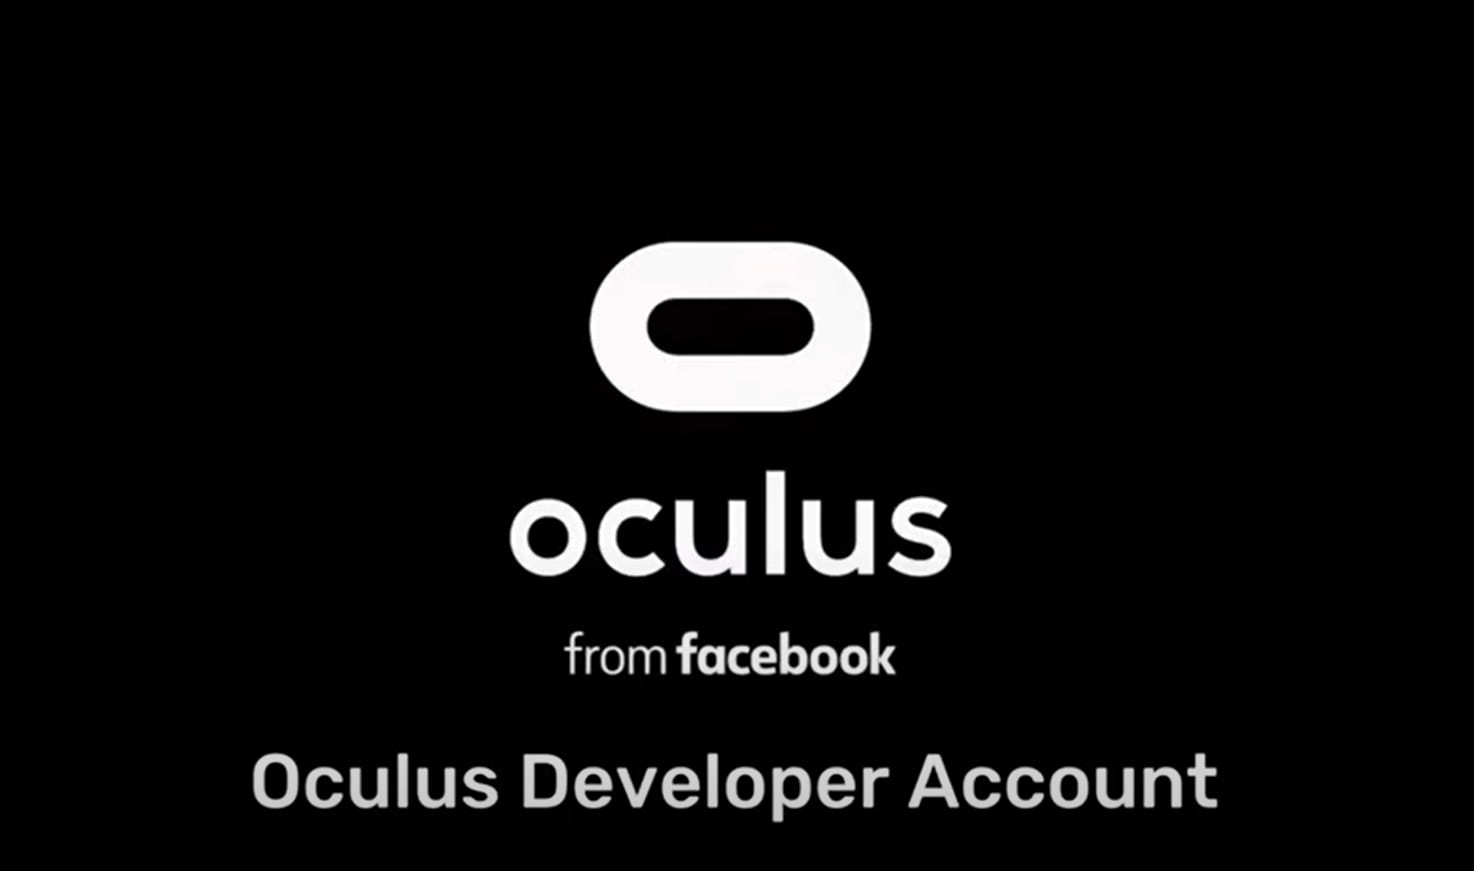 How To Create An Oculus Developer Account?